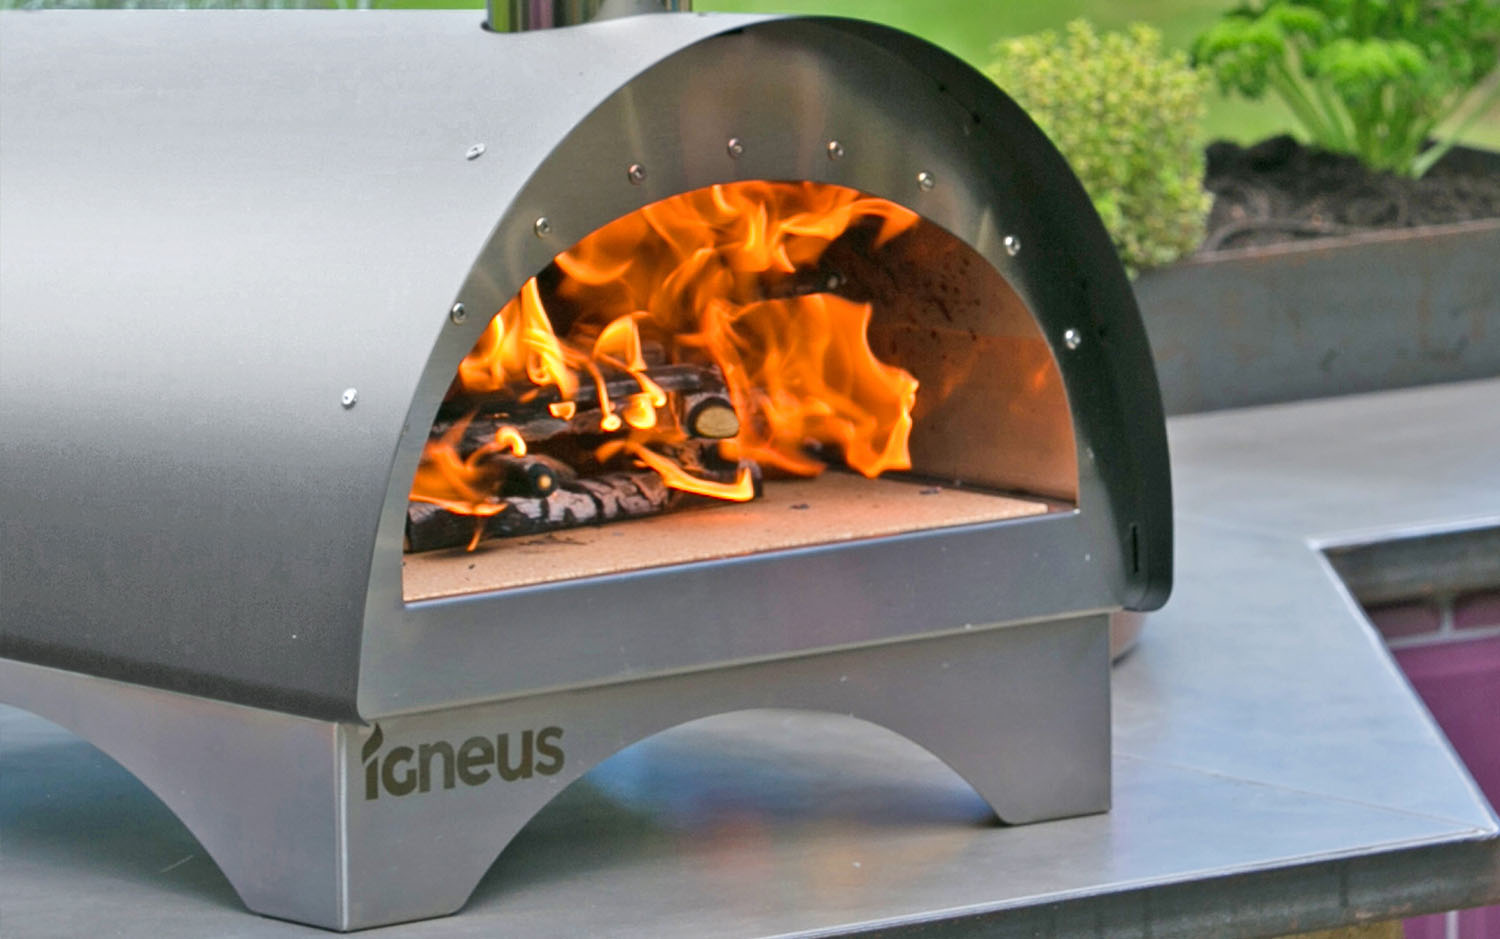 Igneus Minimo pizza oven - best portable pizza ovens - igneus wood fired pizza ovens uk